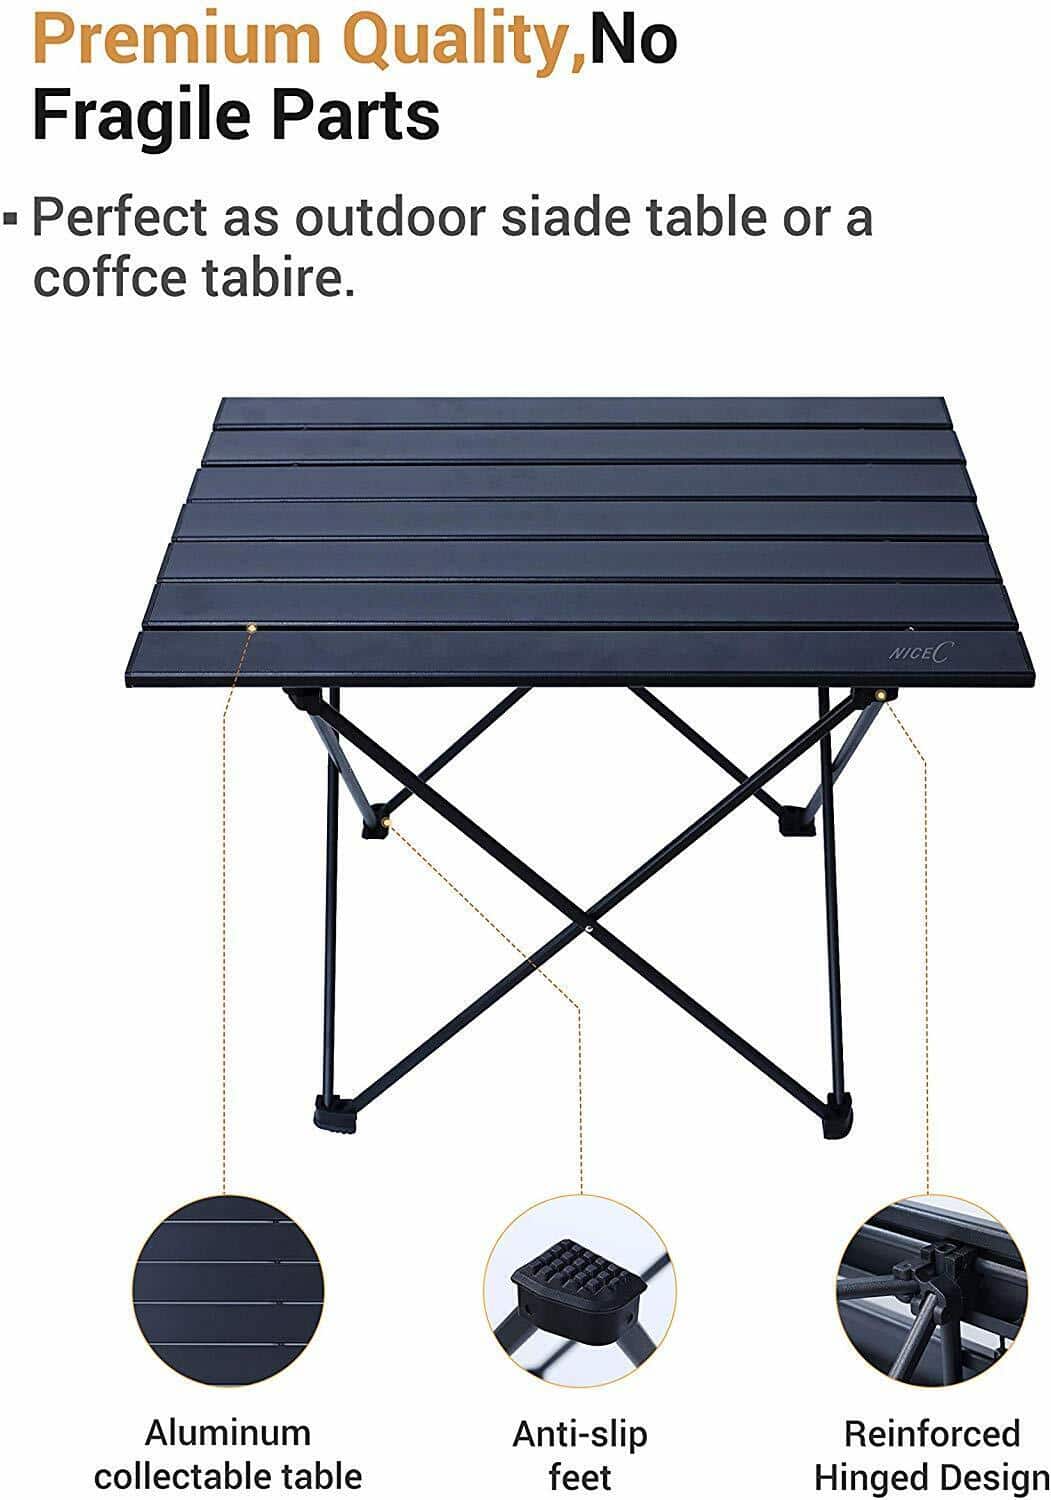 A folding table with a coffee table and a coffee cup.